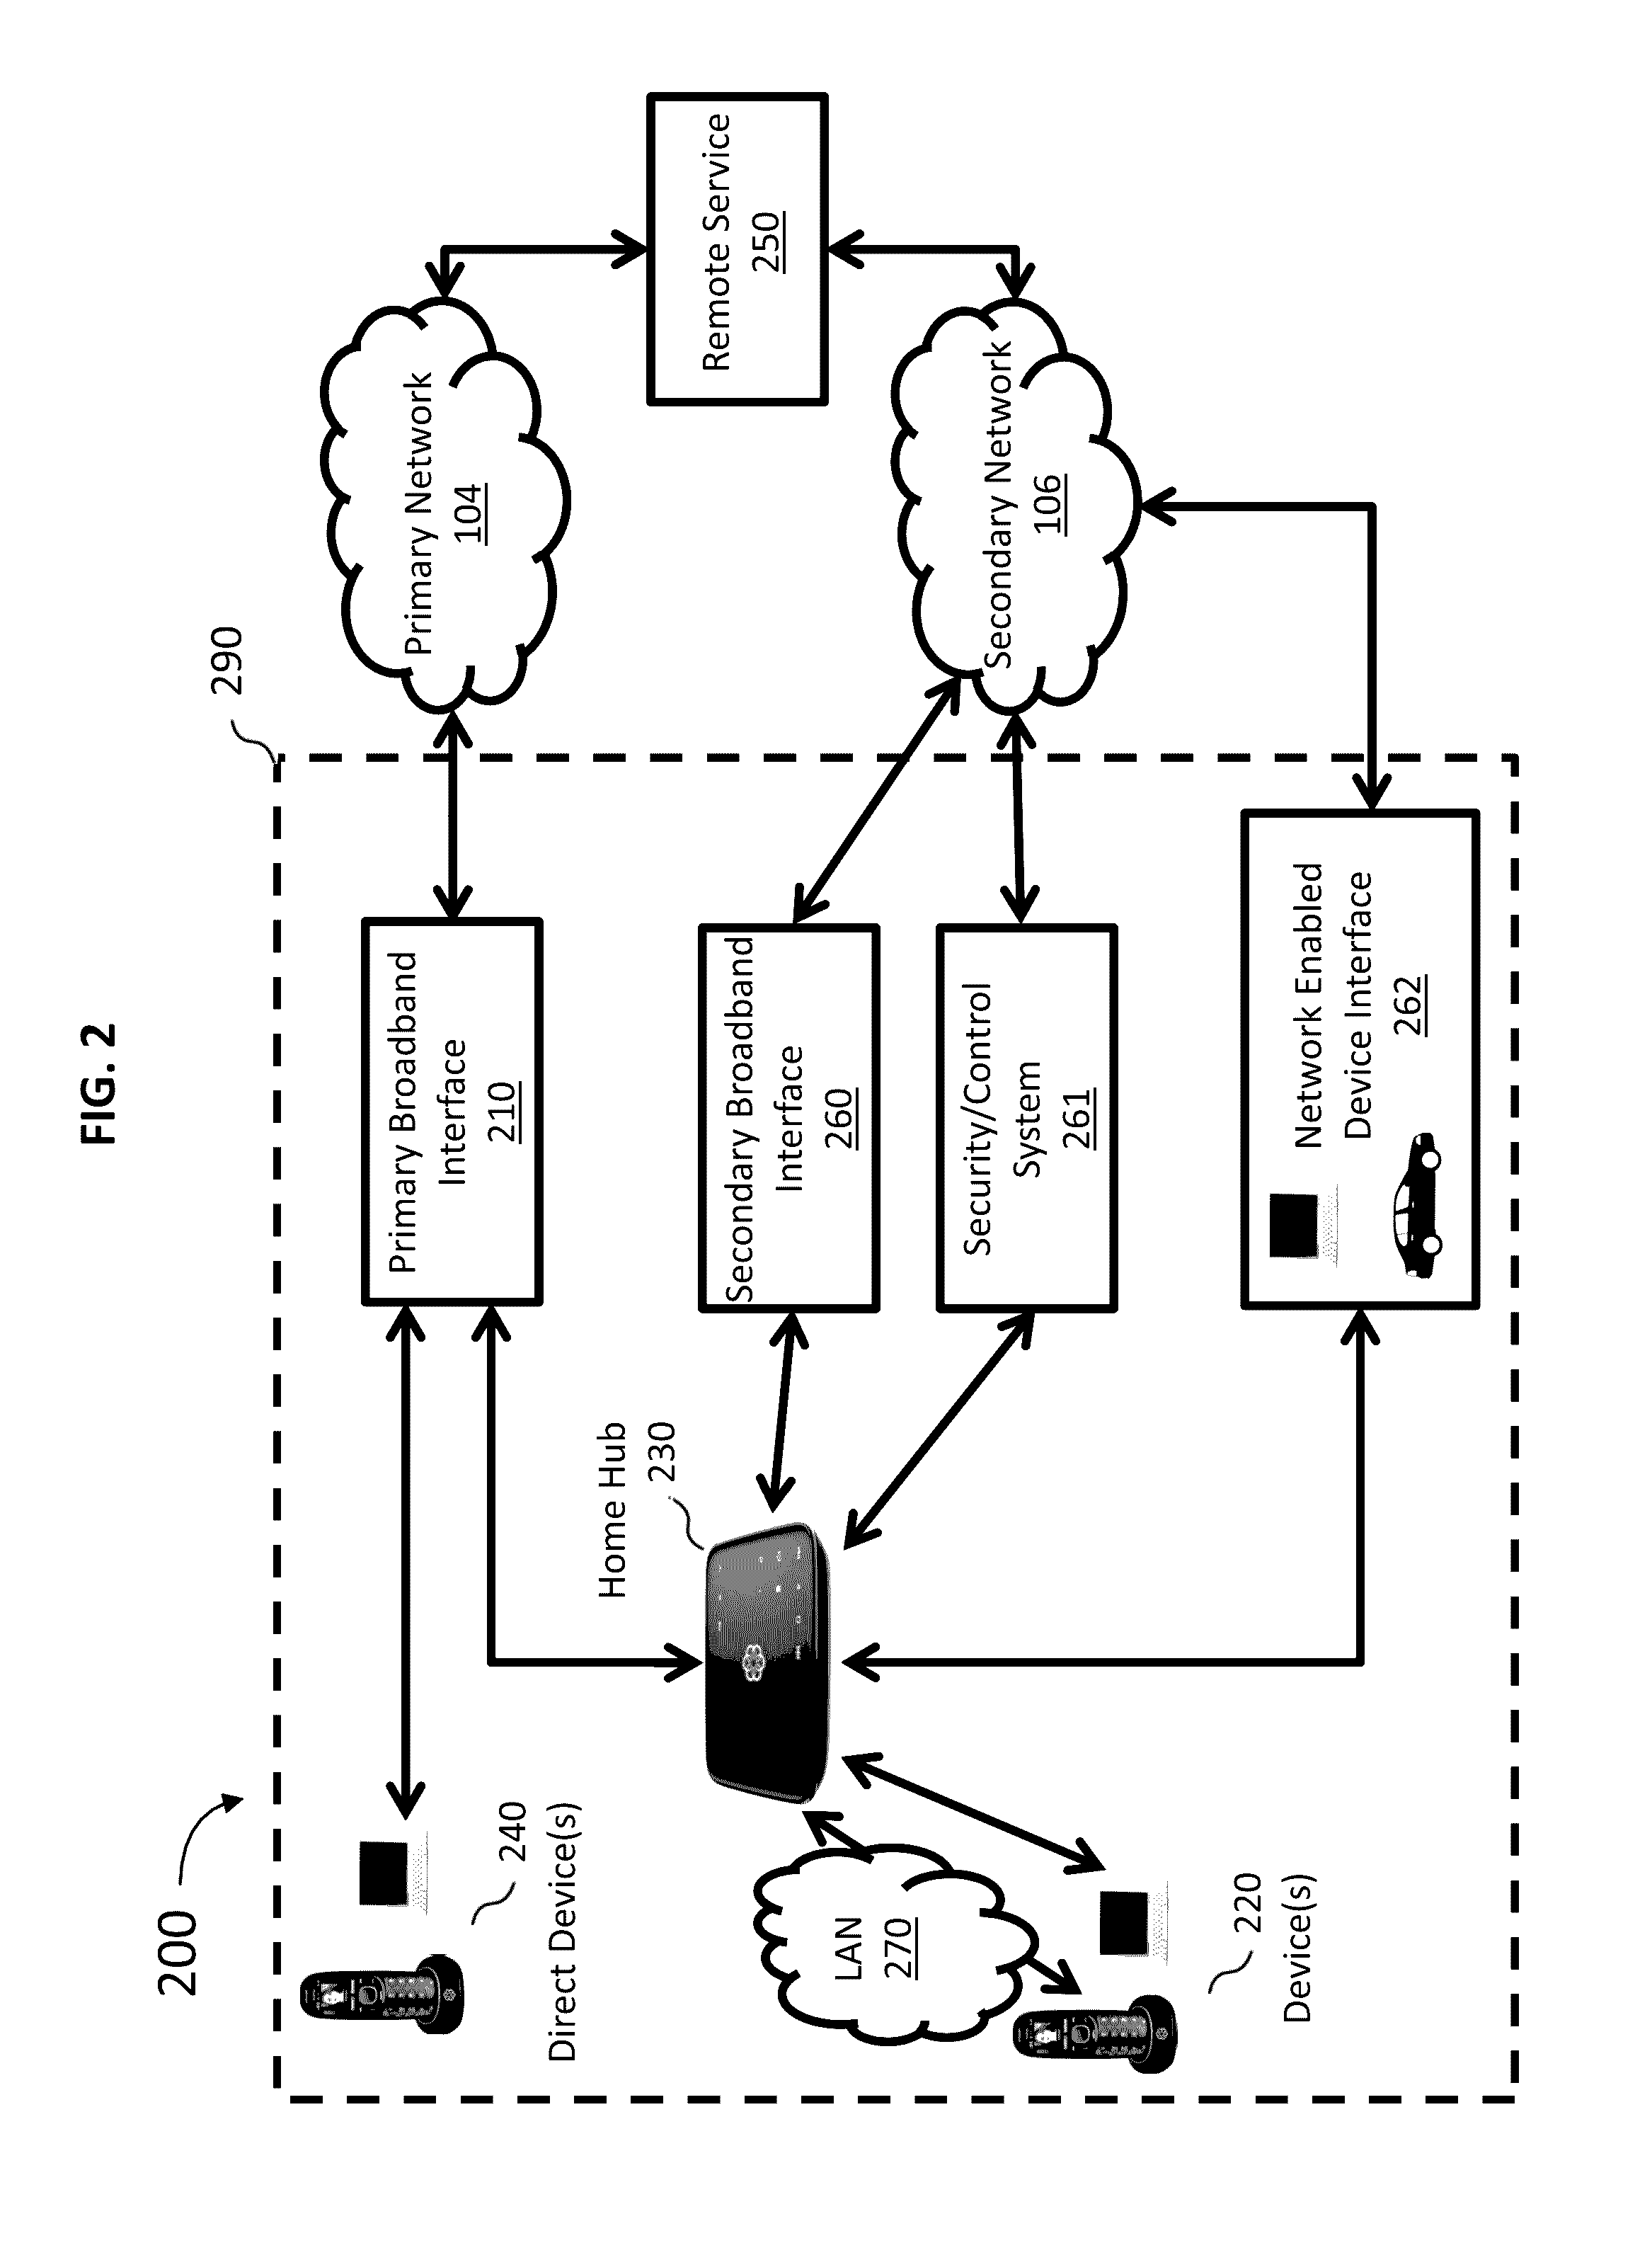 Managing alternative networks for high quality of service communications